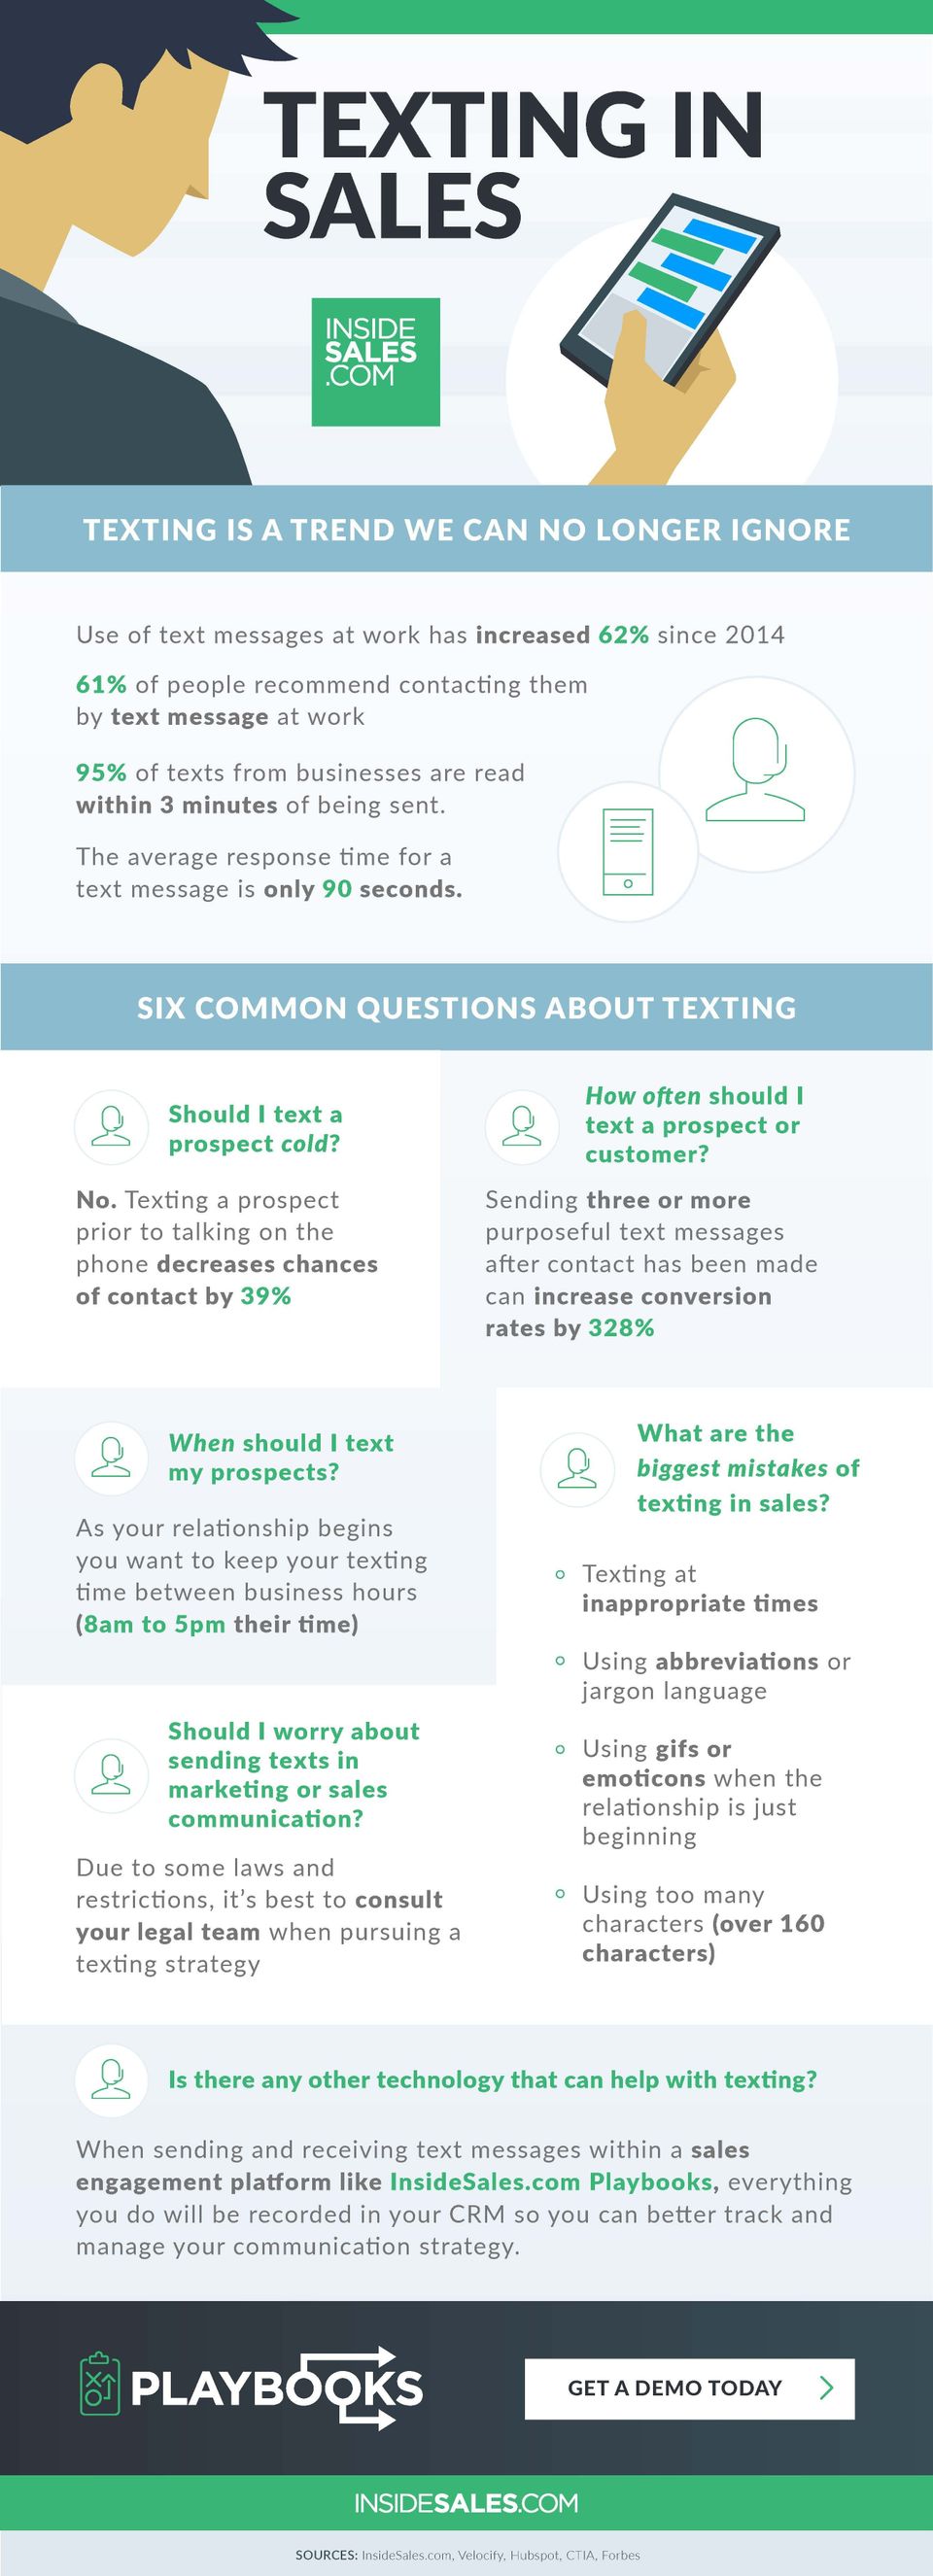 Texting in sales